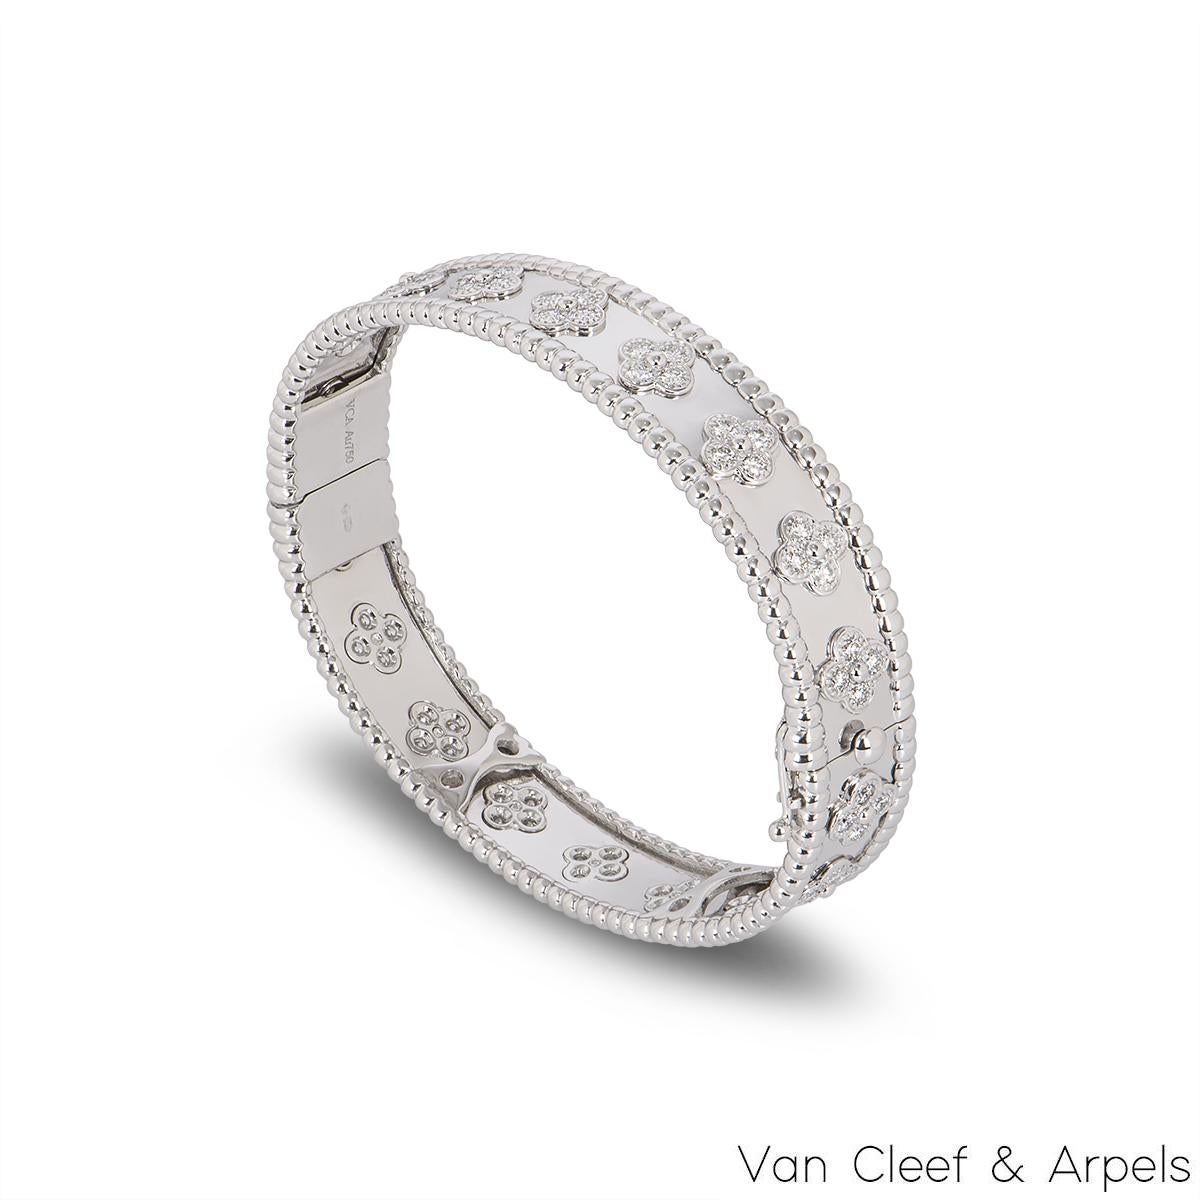 A stunning 18k white gold bracelet by Van Cleef & Arpels from the Perlée Clovers collection. The bracelet features 20 four leaf clover motifs, each set with 4 round brilliant cut diamonds, totaling approximately 1.78ct, D-F colour and IF-VVS